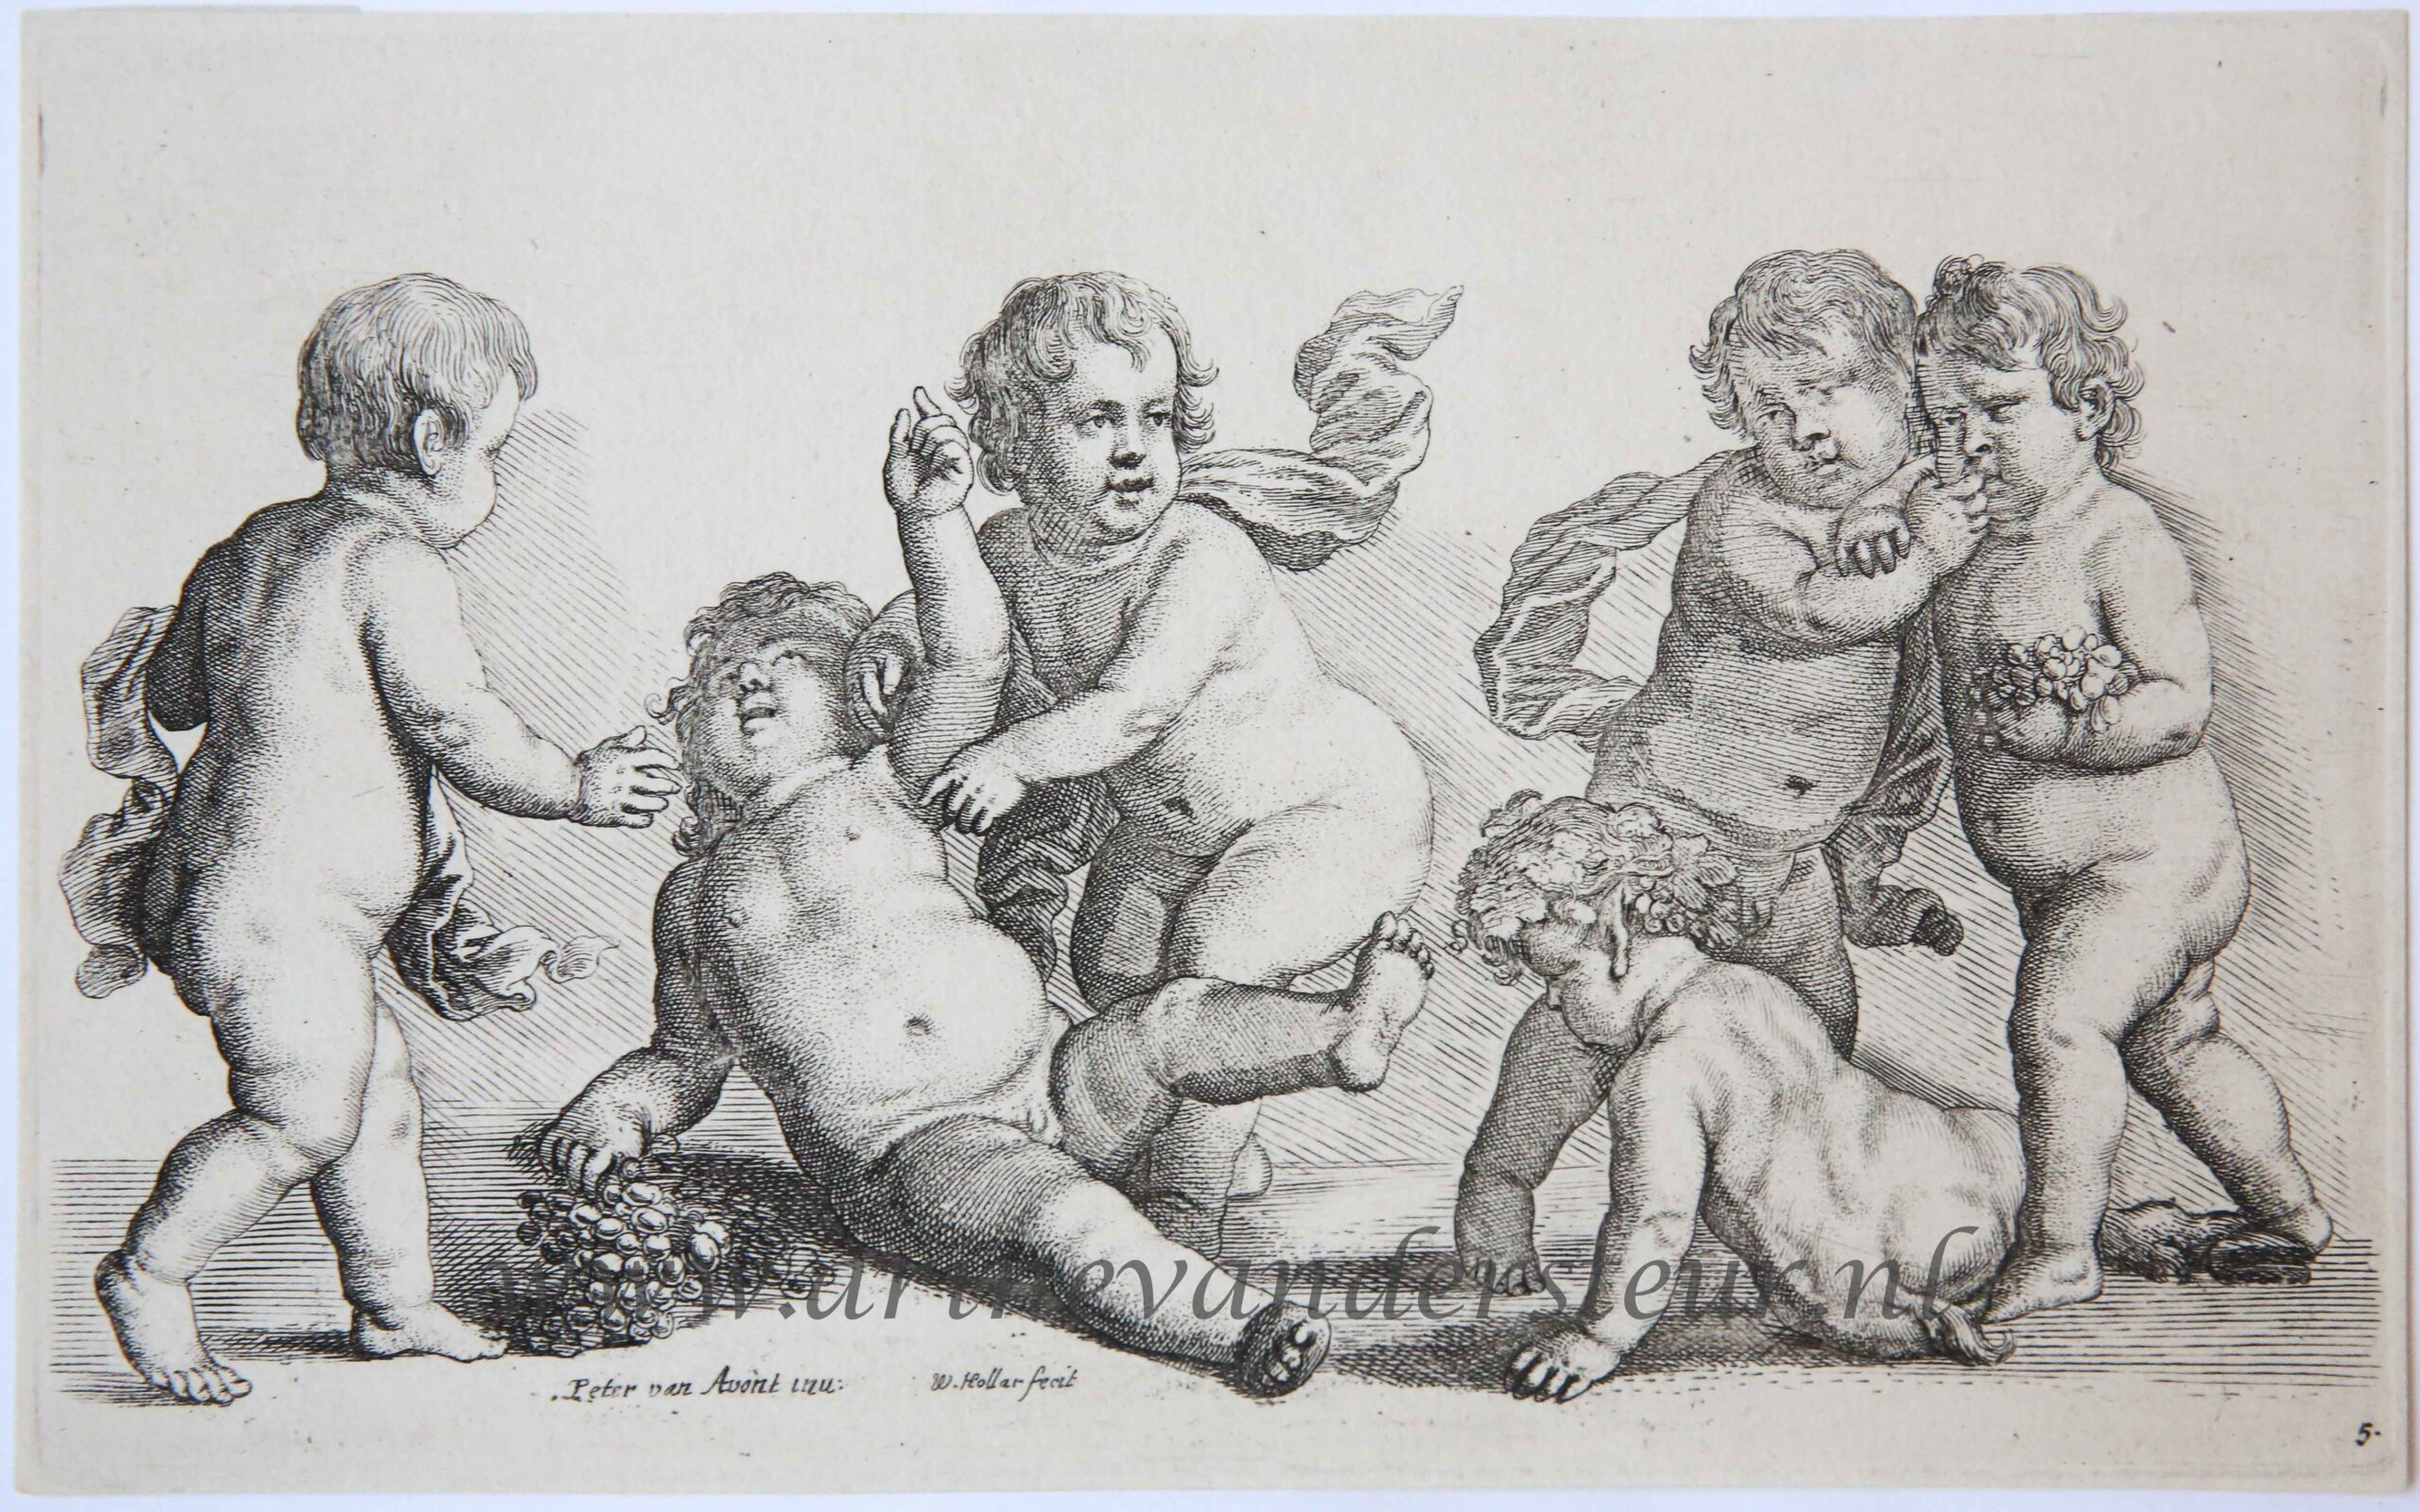 [Antique print, etching] Five boys and a satyr [Paedopaegnion], ca 1625-1677.